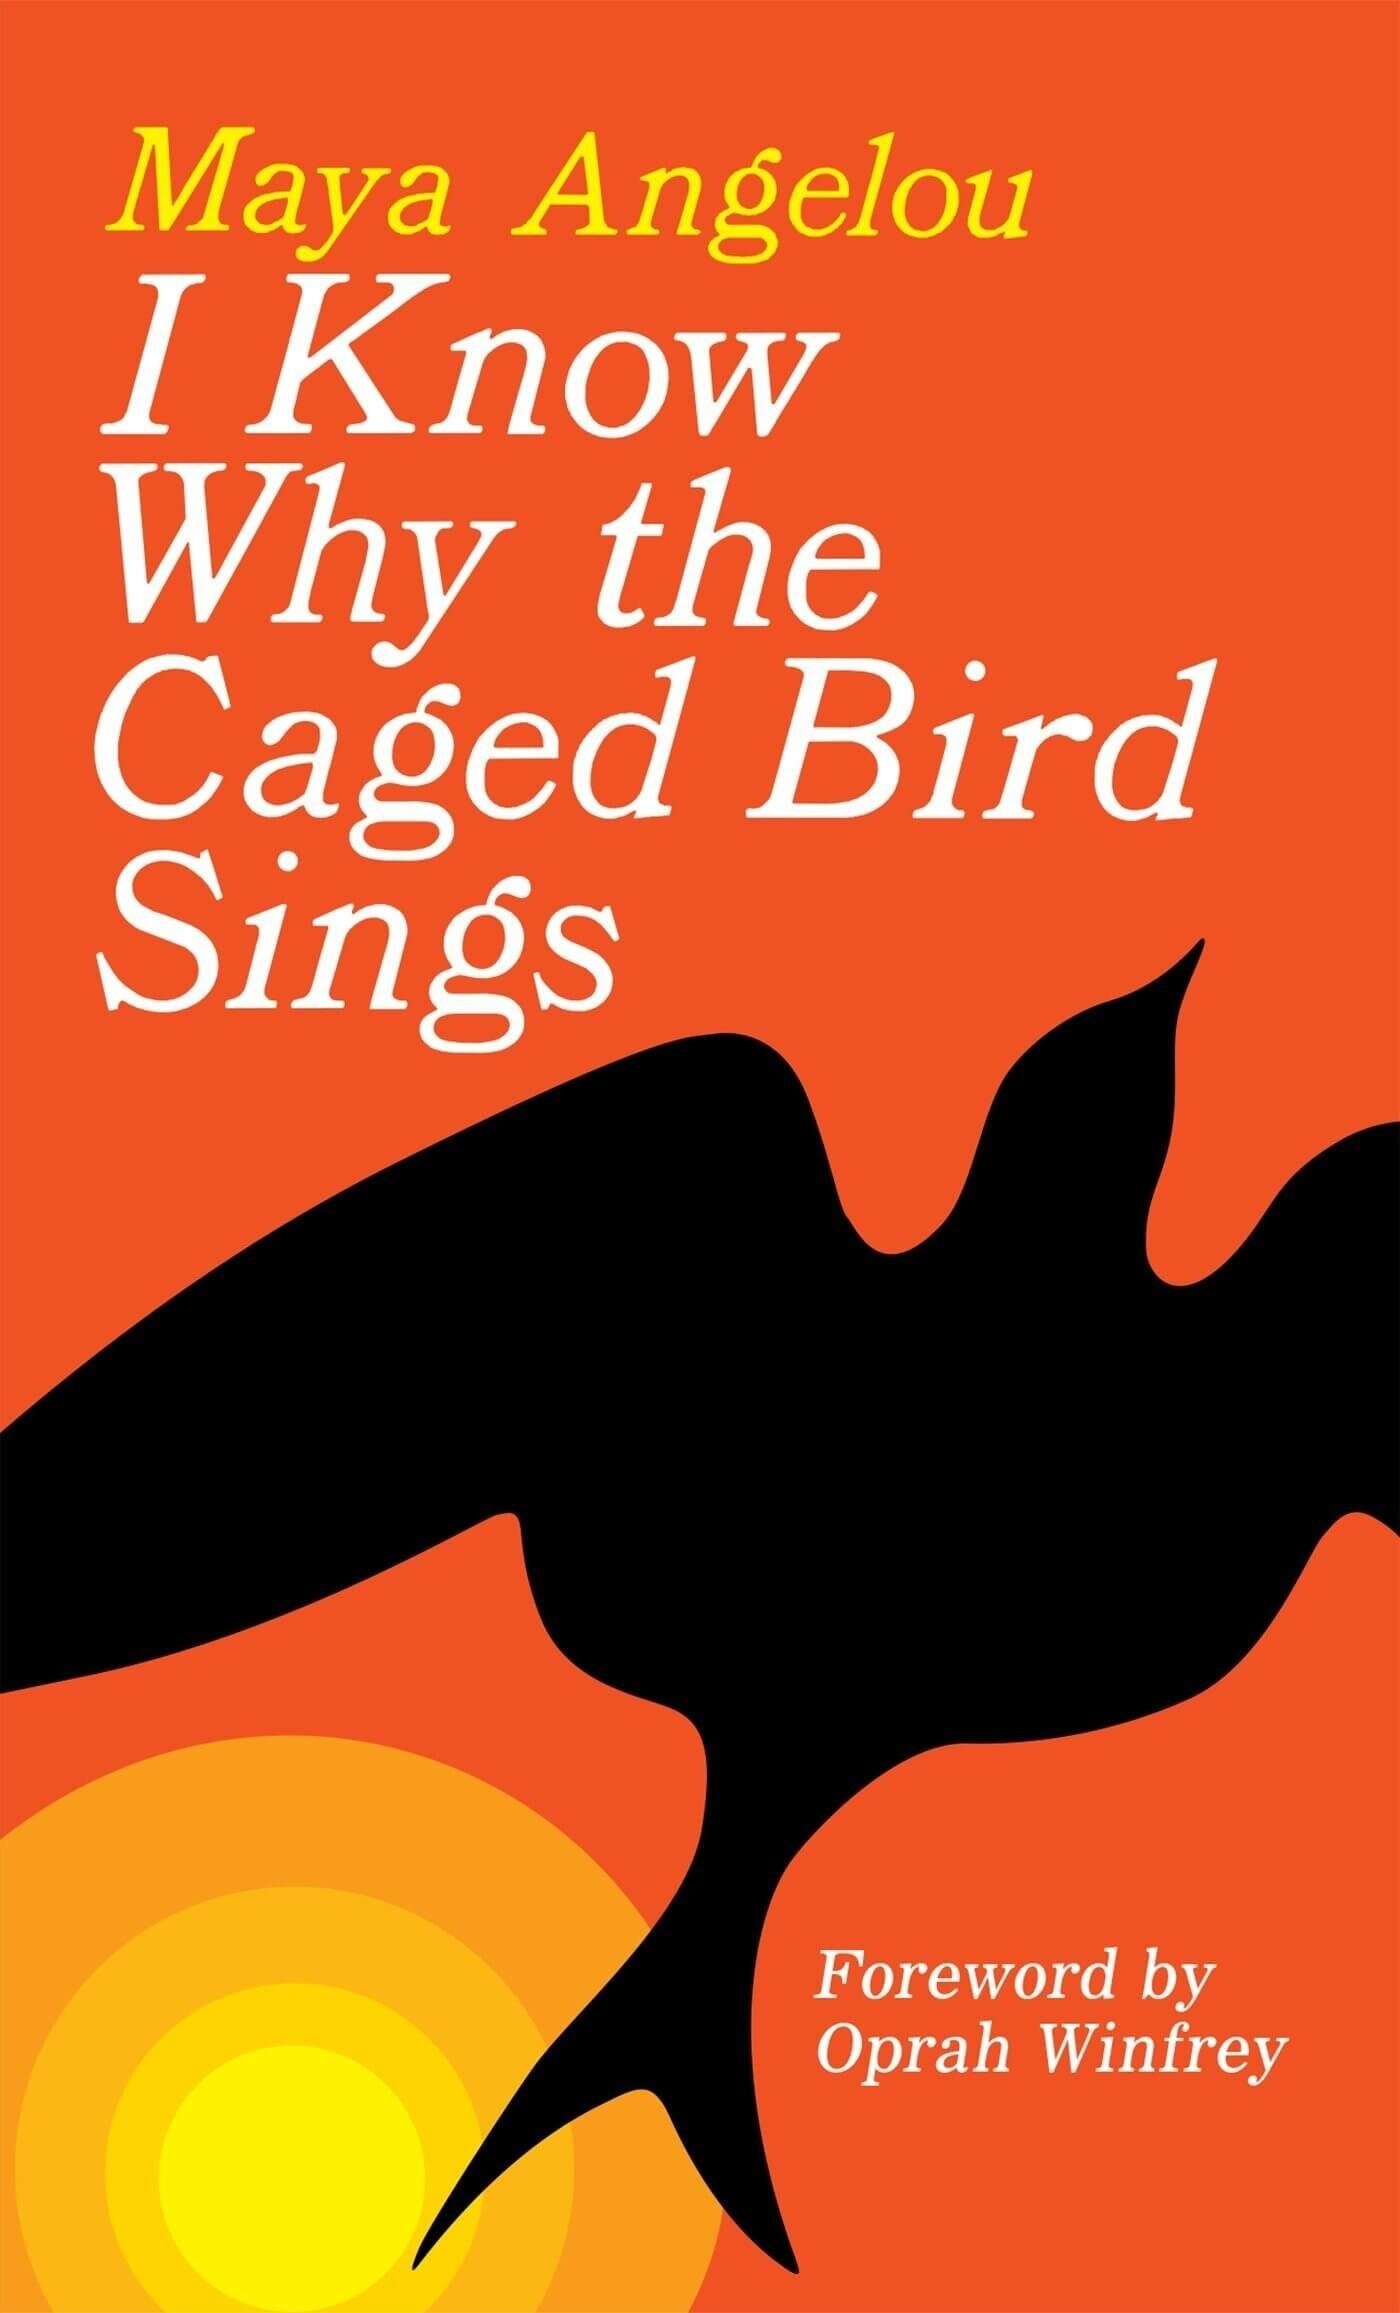 &quot;I Know Why the Caged Bird Sings&quot; by Maya Angelou.